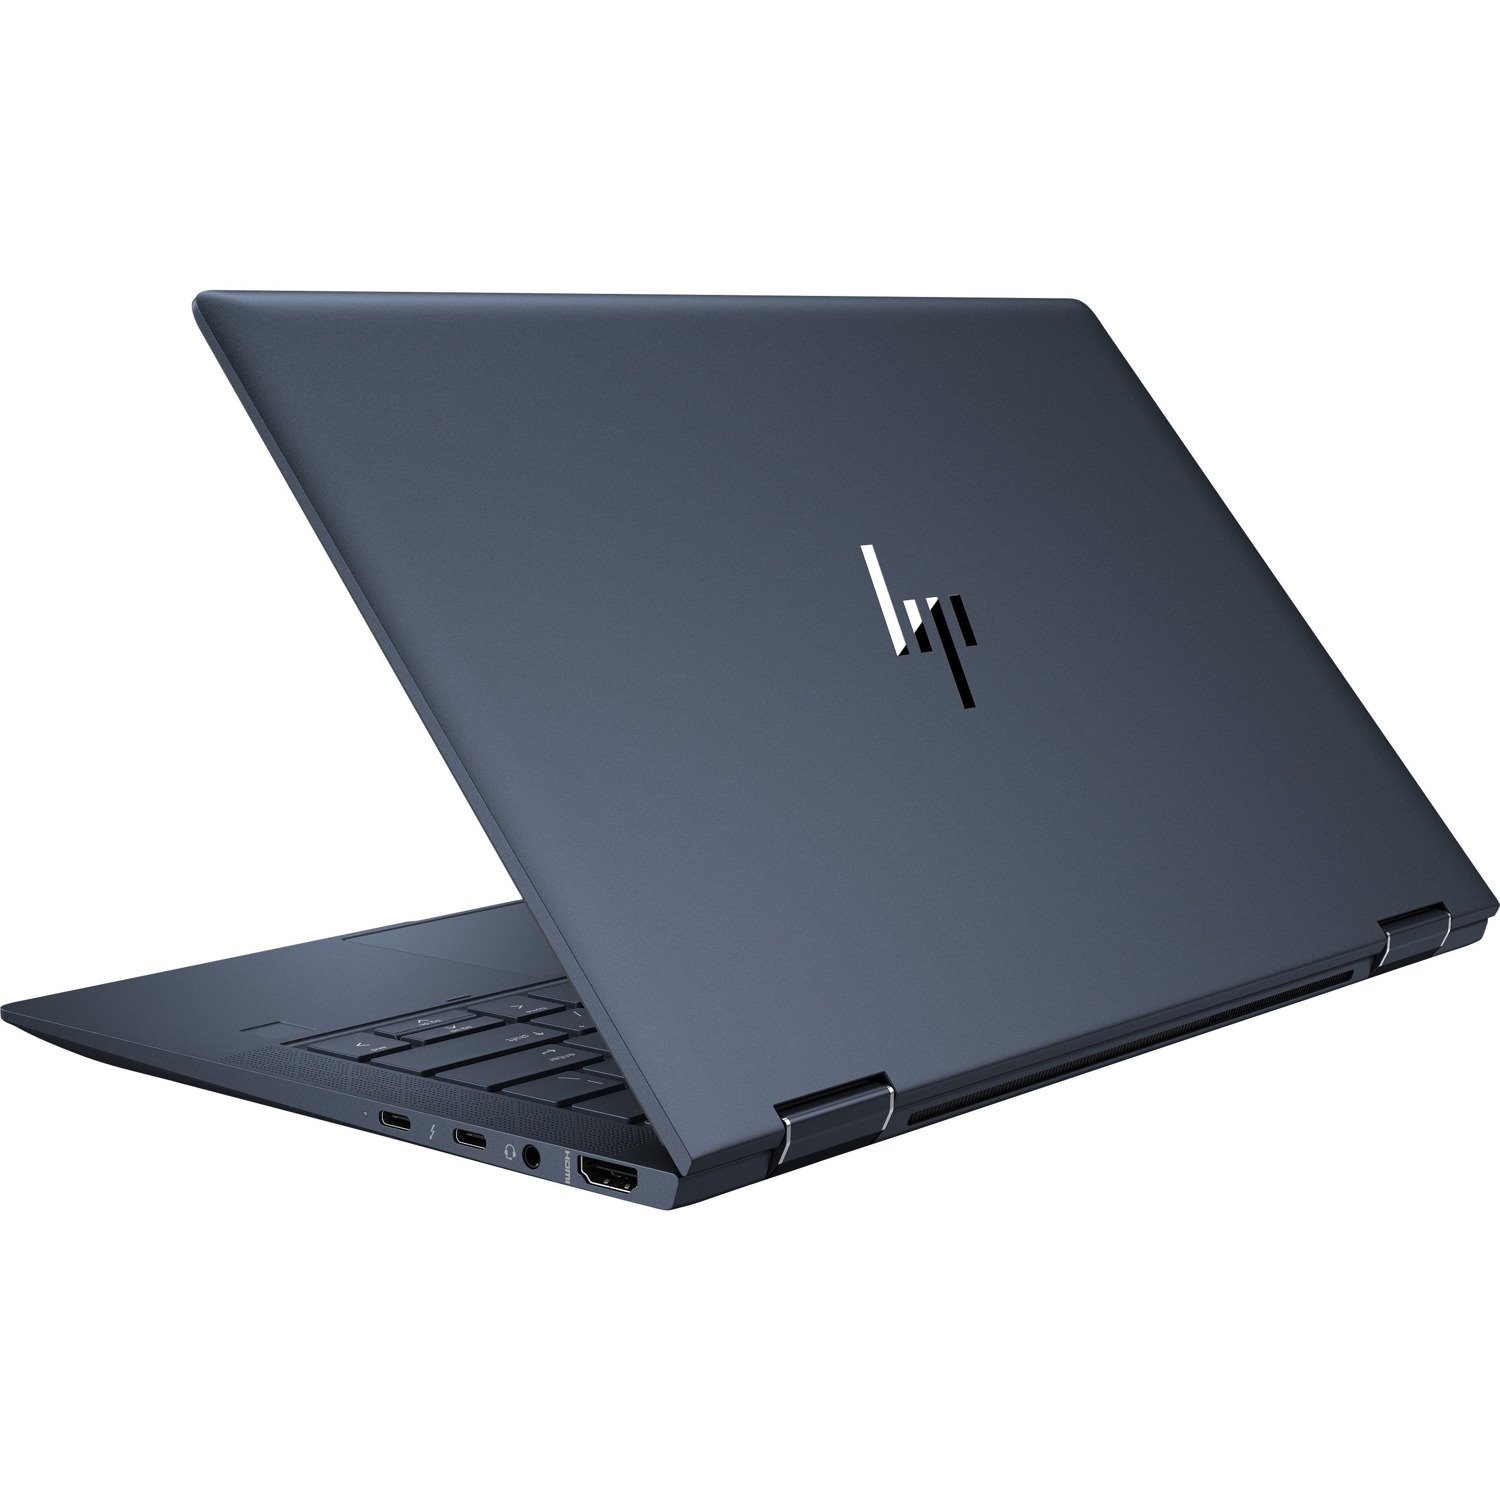 HP Elite Dragonfly G2 13.3" Touchscreen Convertible 2 in 1 Notebook - Full HD - 1920 x 1080 - Intel Core i5 11th Gen i5-1135G7 Quad-core (4 Core) 2.40 GHz - 8 GB Total RAM - 256 GB SSD